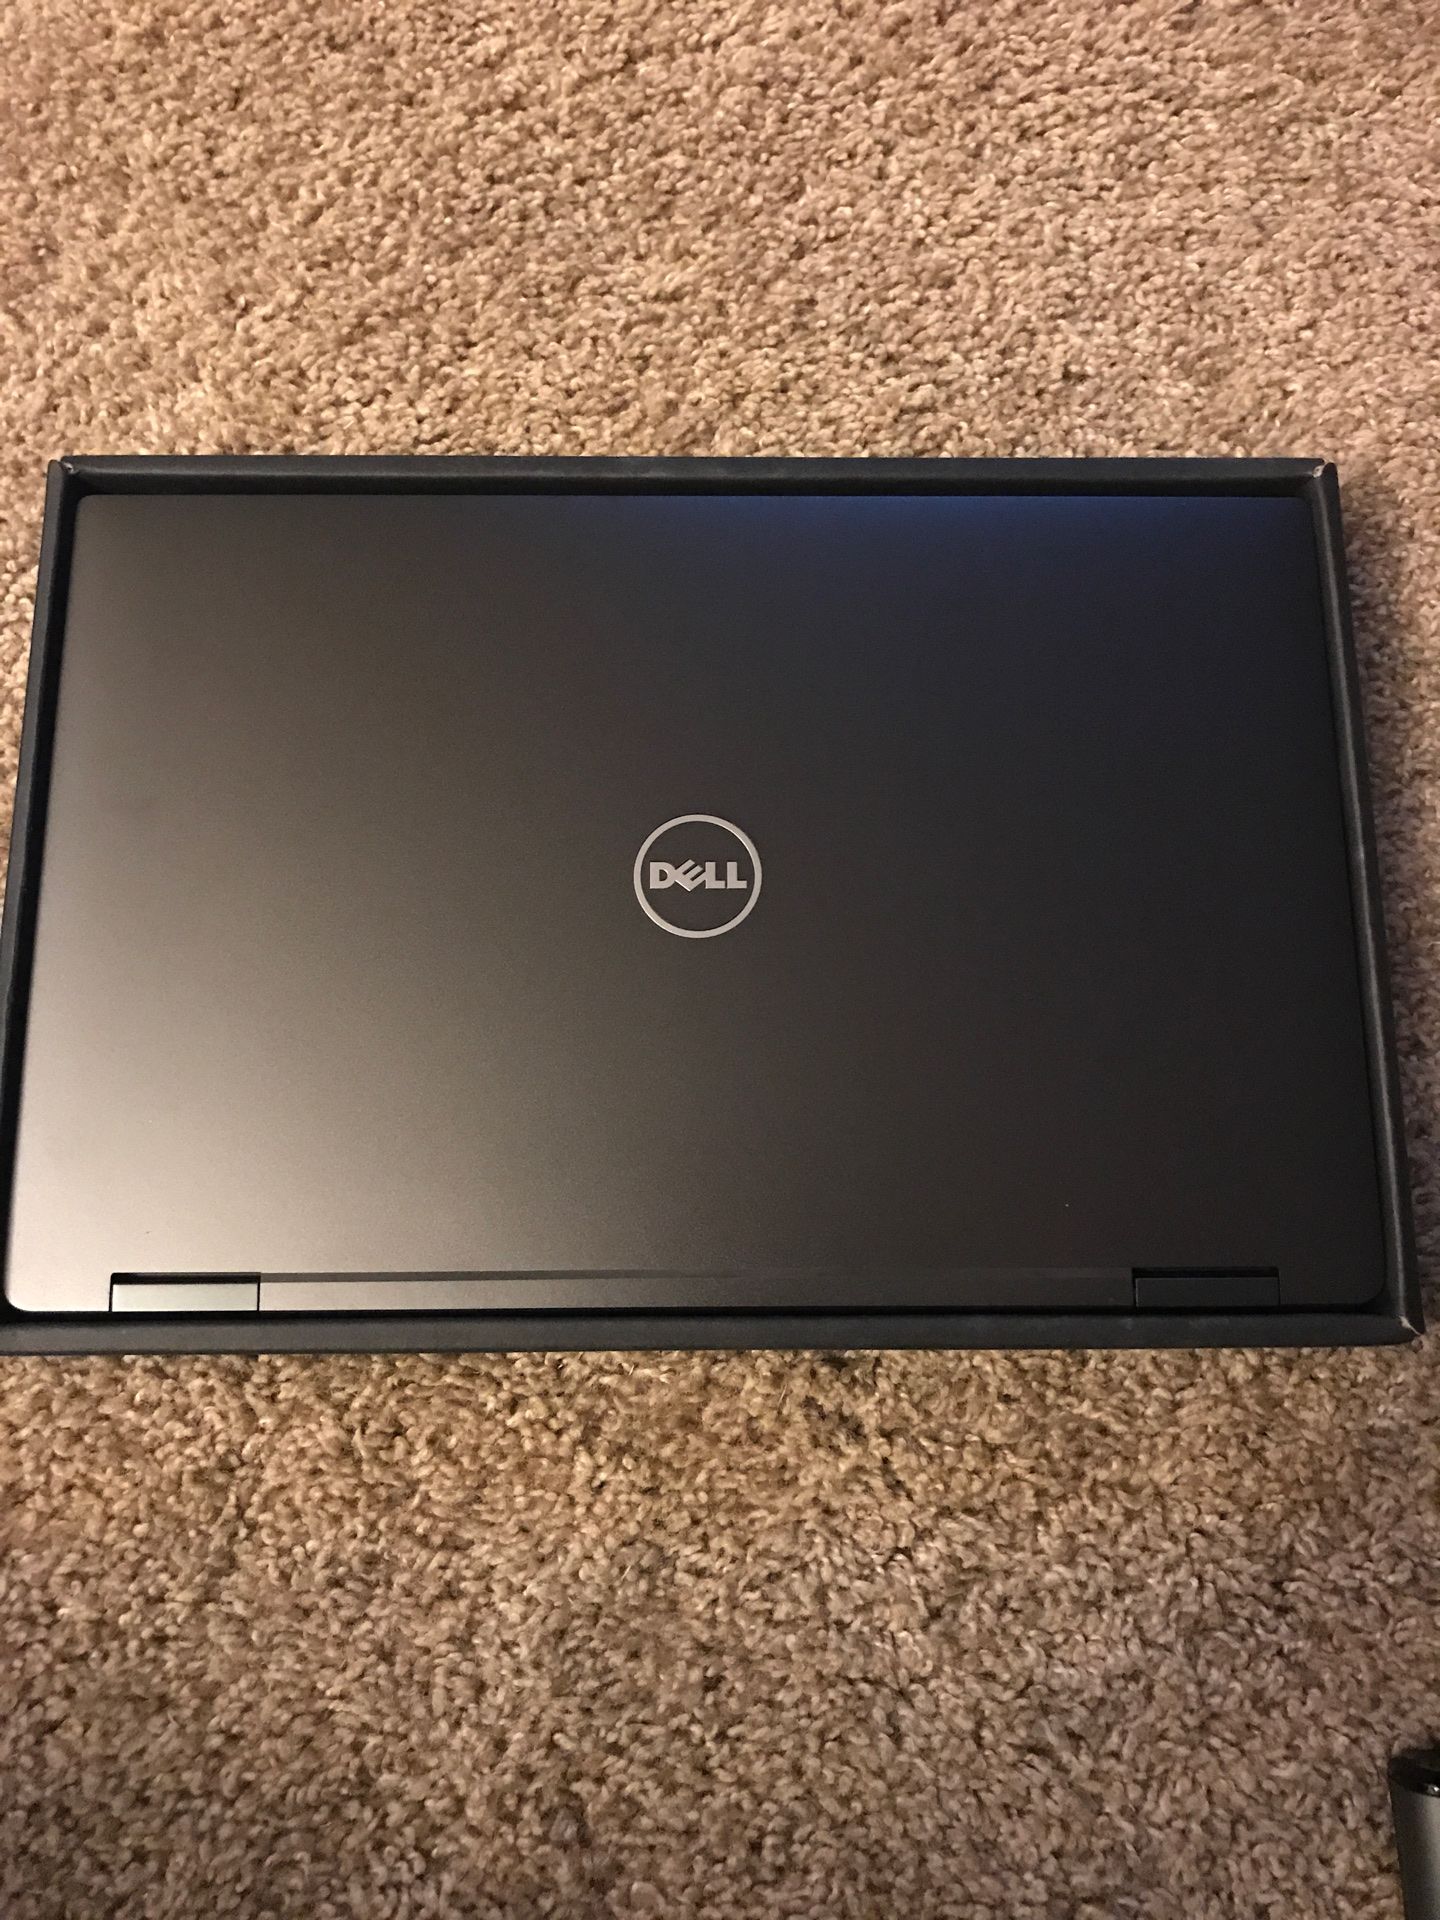 Dell XPS 13 2-in-1 Touchscreen Laptop Black (i7-7Y75, 8GB RAM, 256GB SSD)